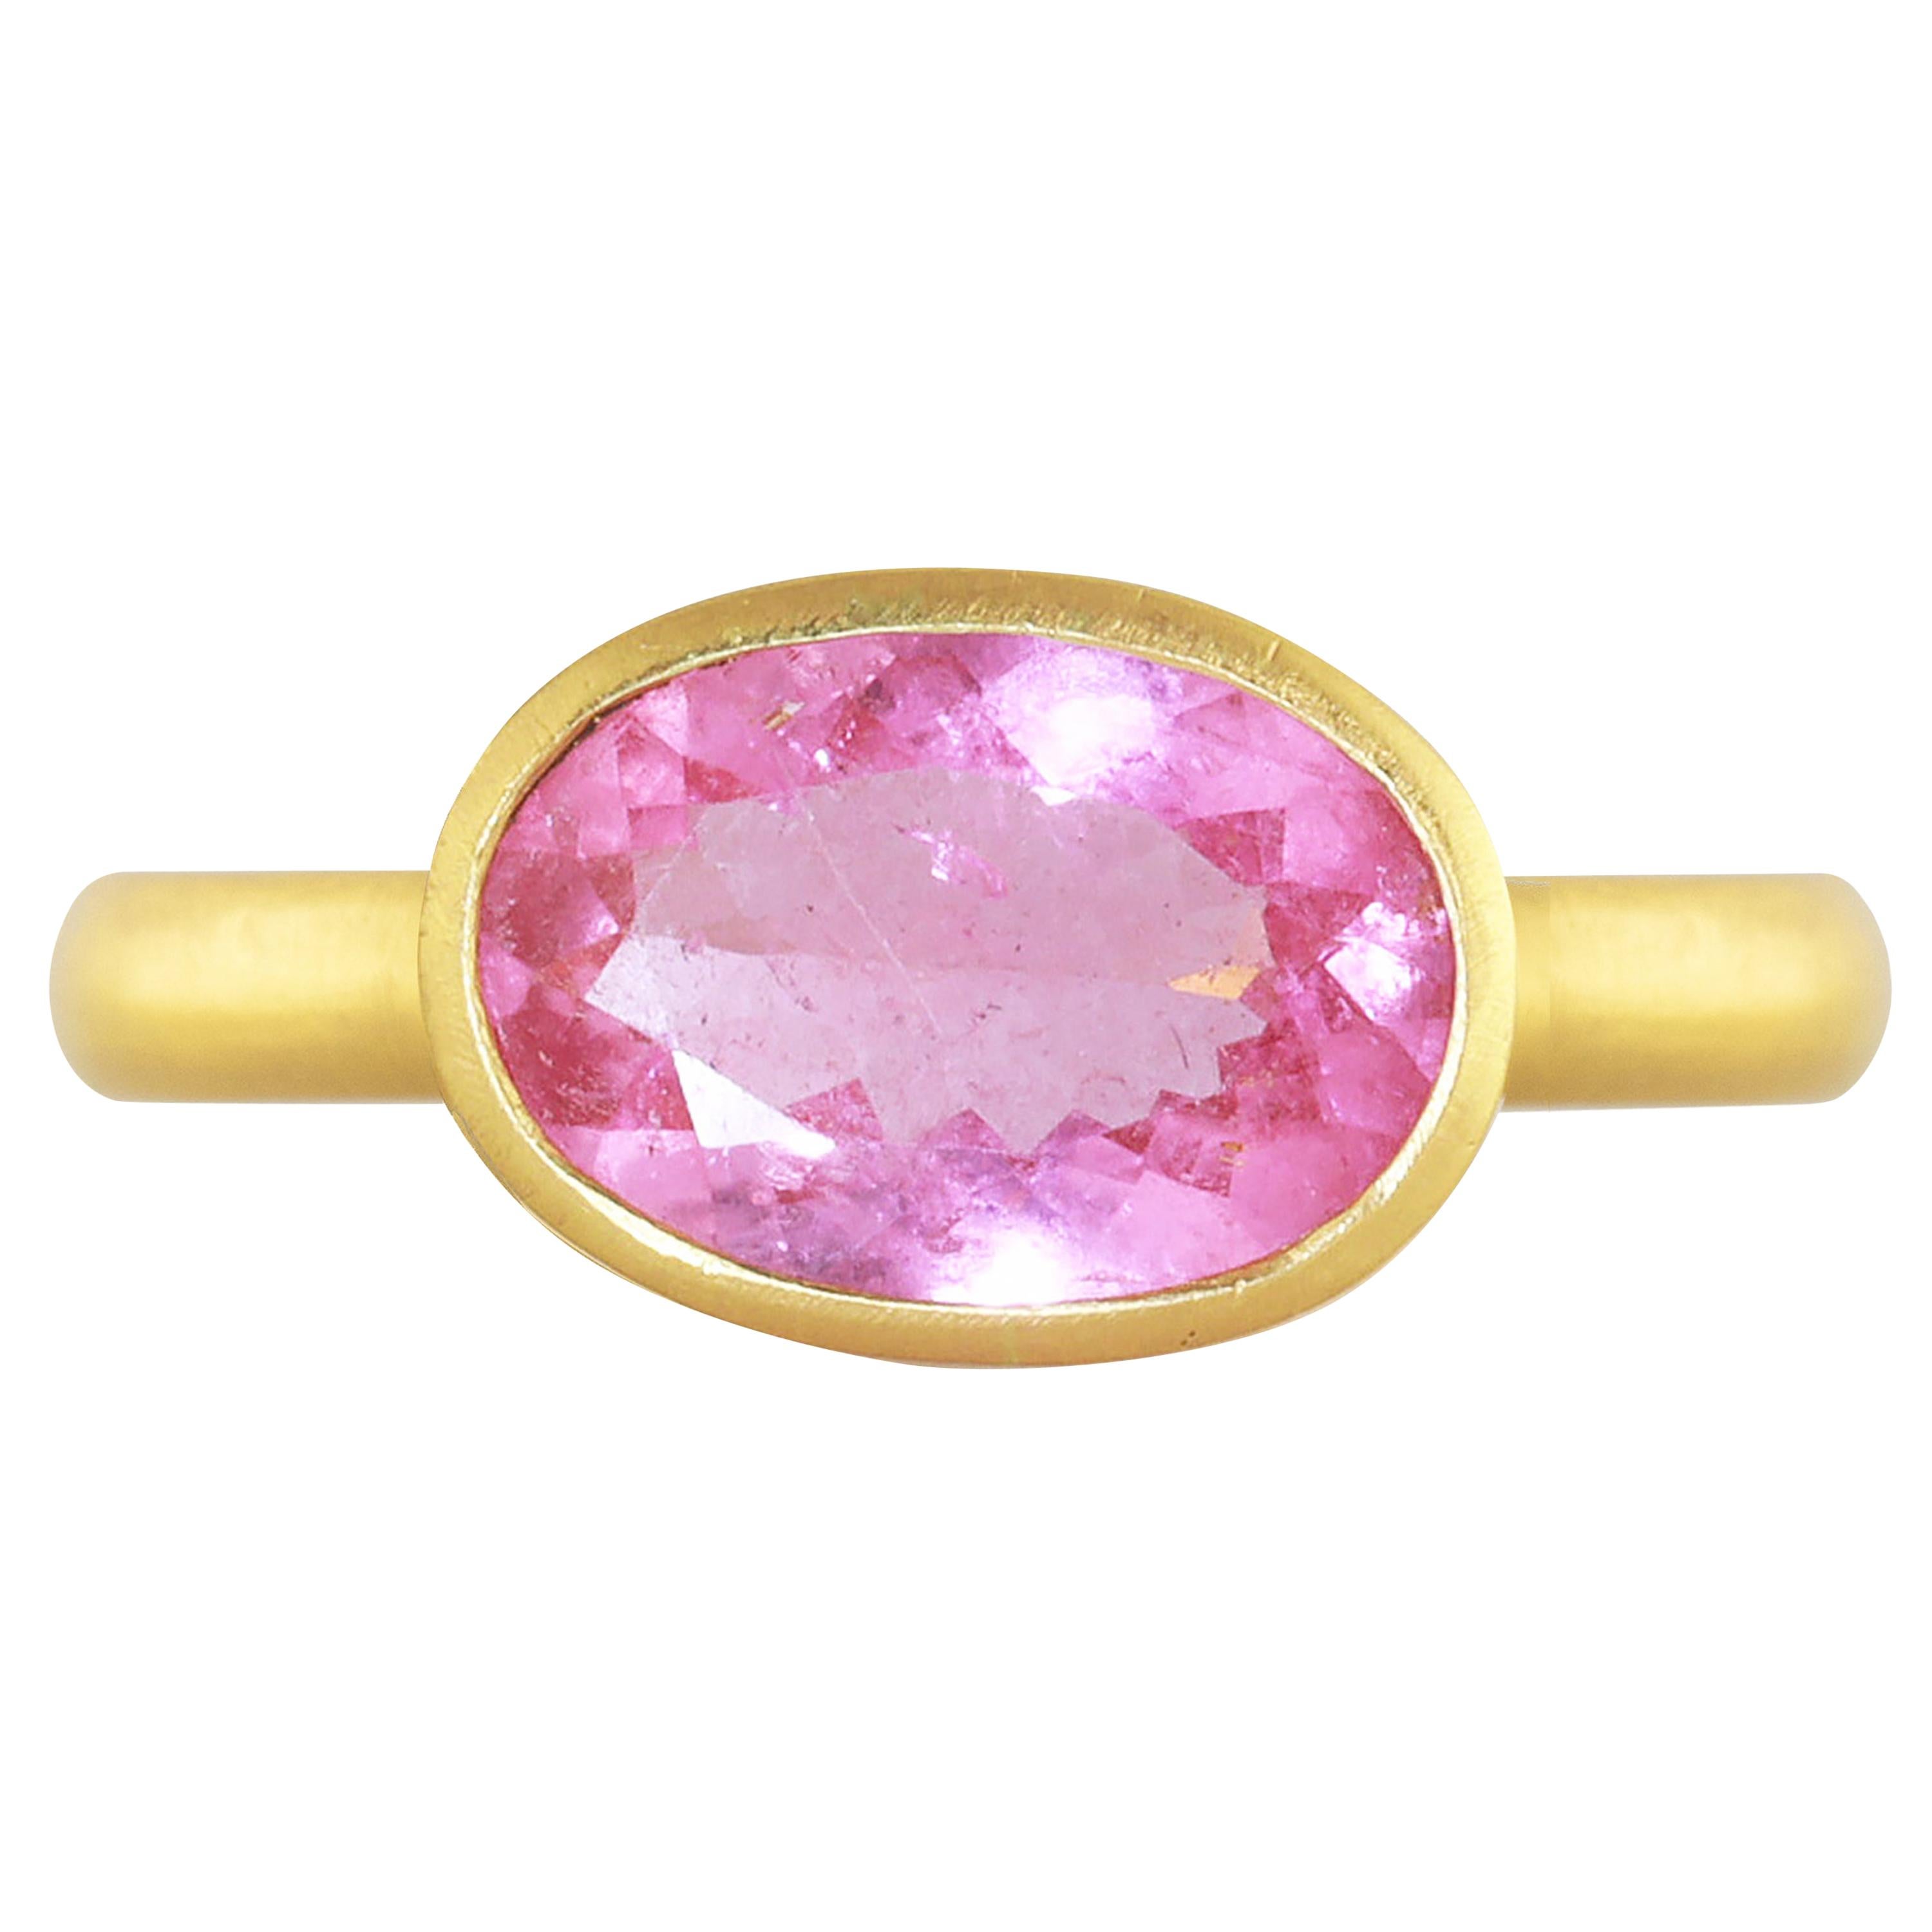 Ico & the Bird Fine Jewelry 3.52 carat Pink Tourmaline Gold Ring For Sale